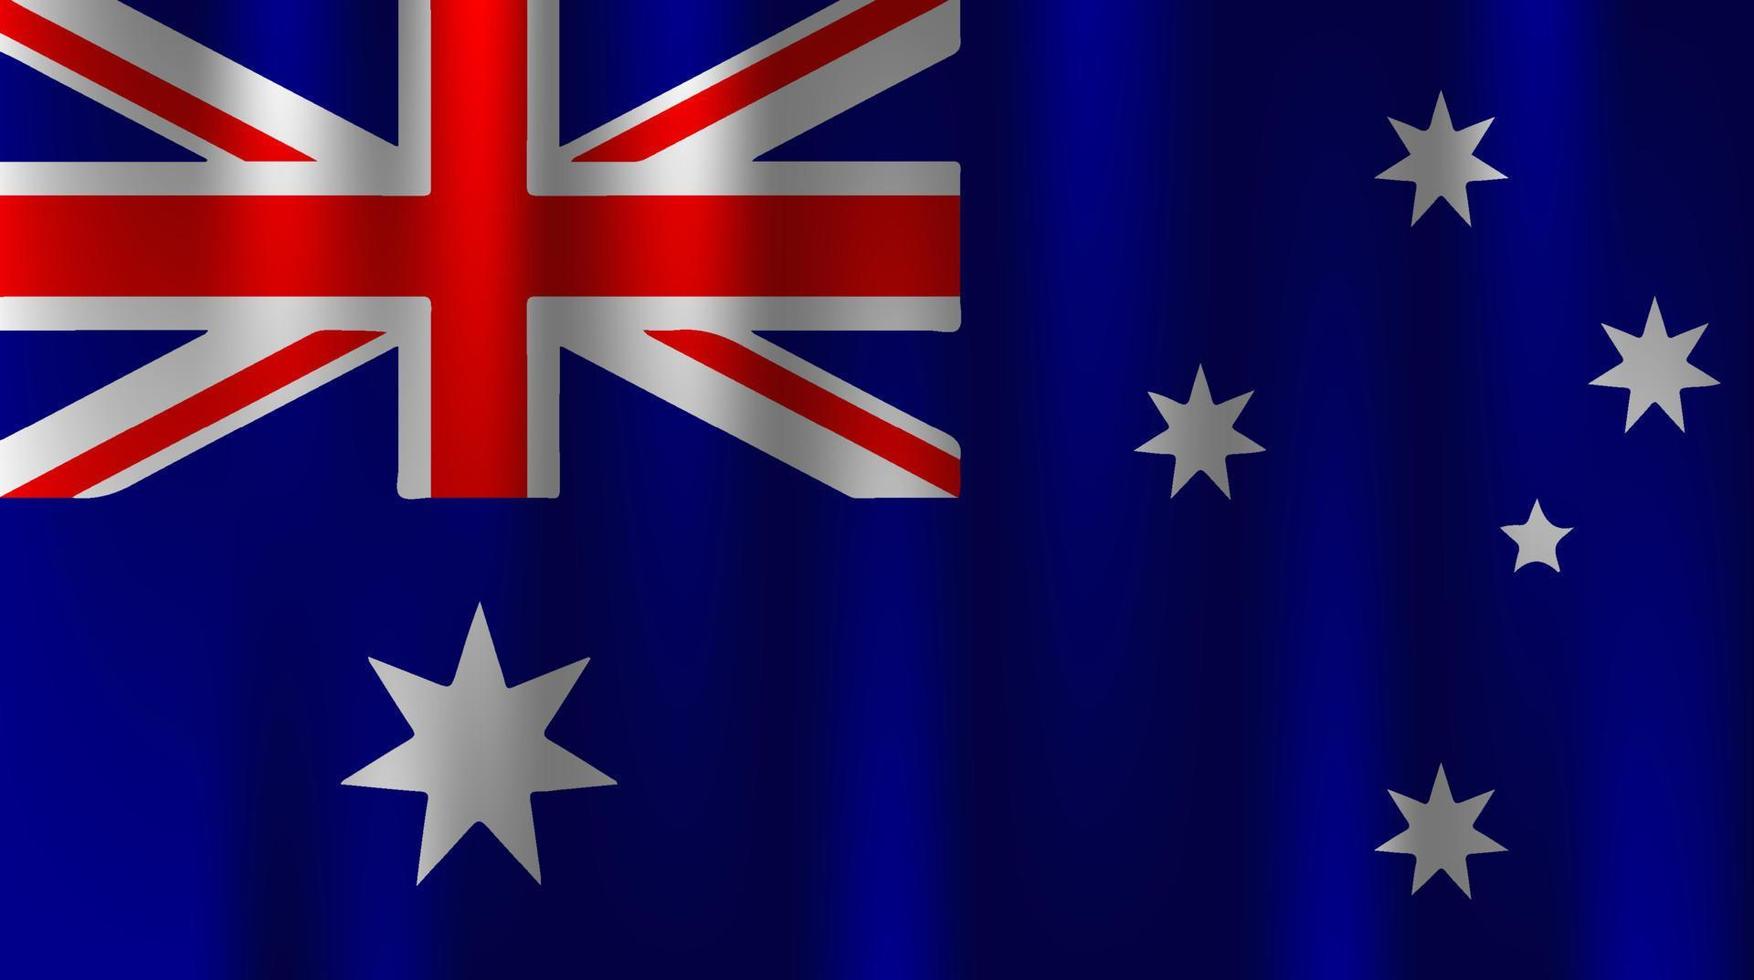 flag of australia country nation symbol 3d textile satin effect background wallpaper vector